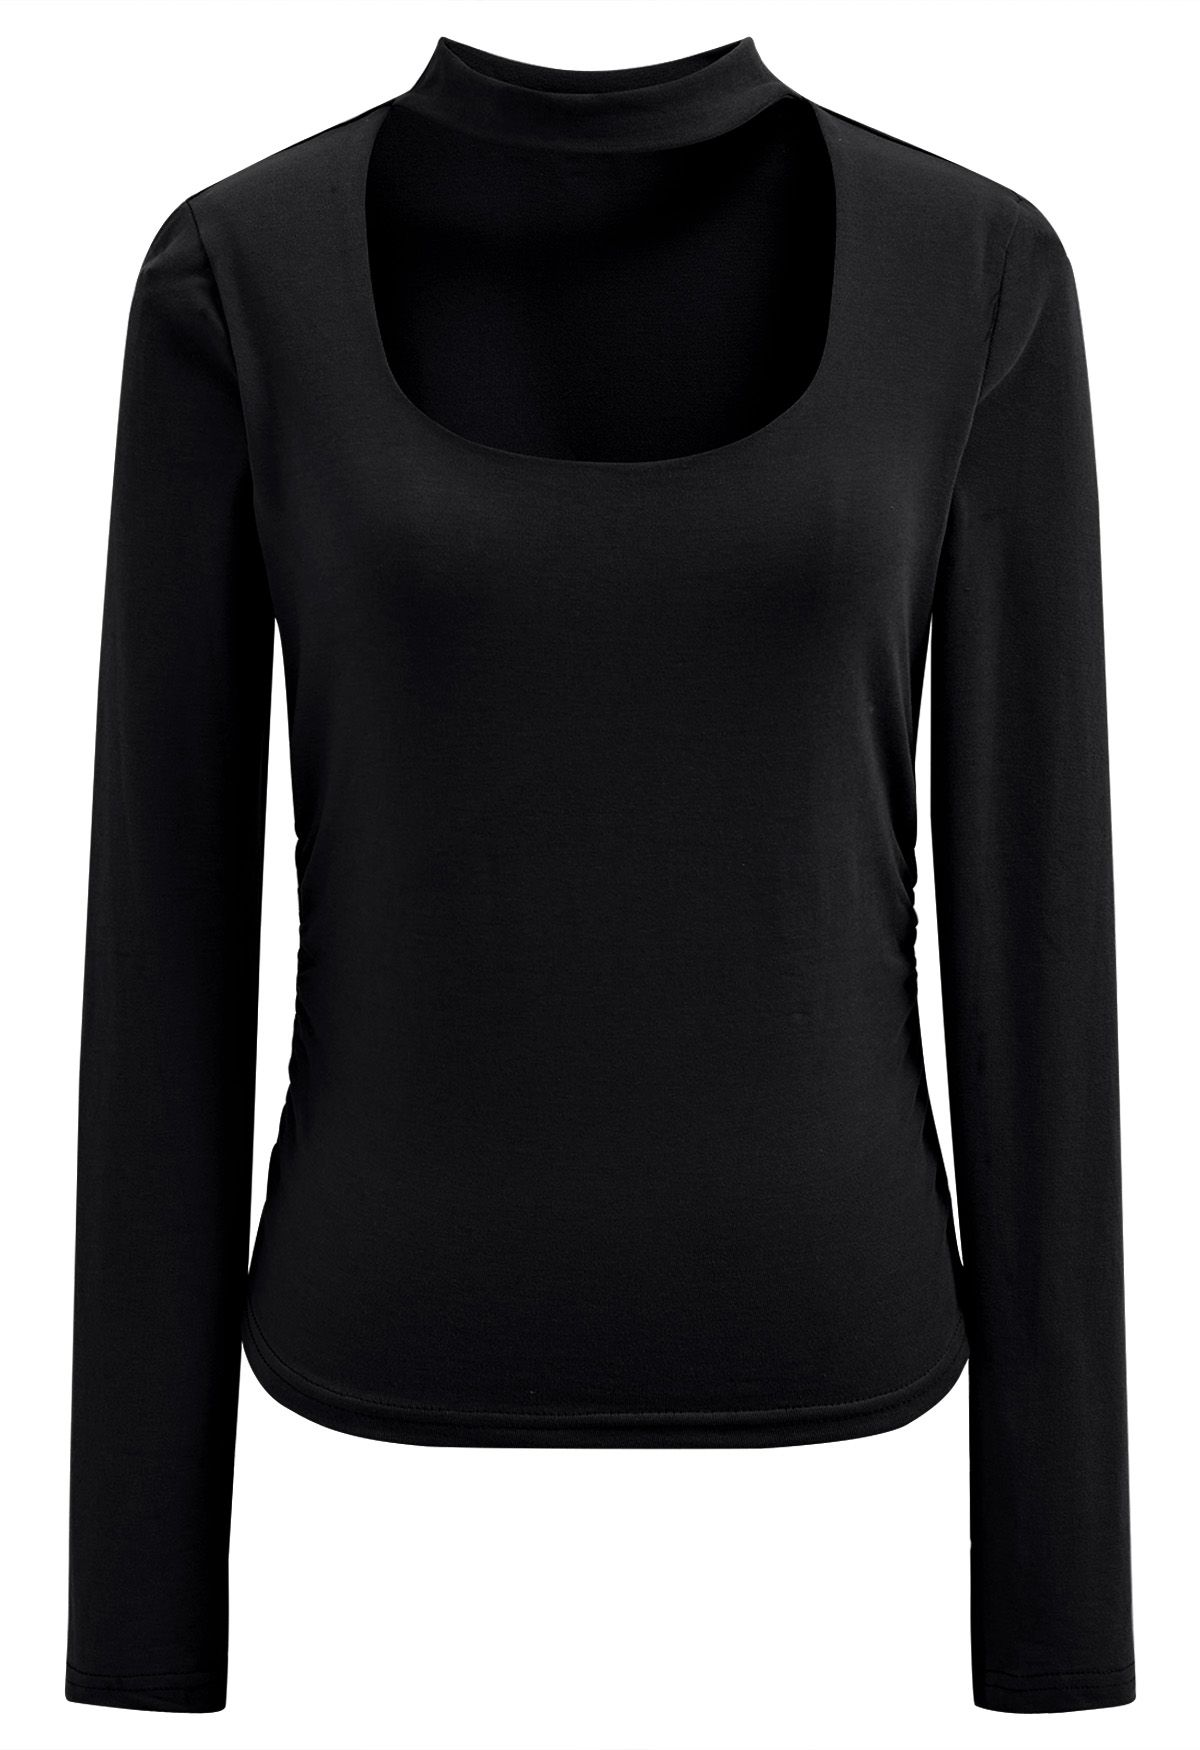 Cut Out Choker Neck Ruched Top in Black